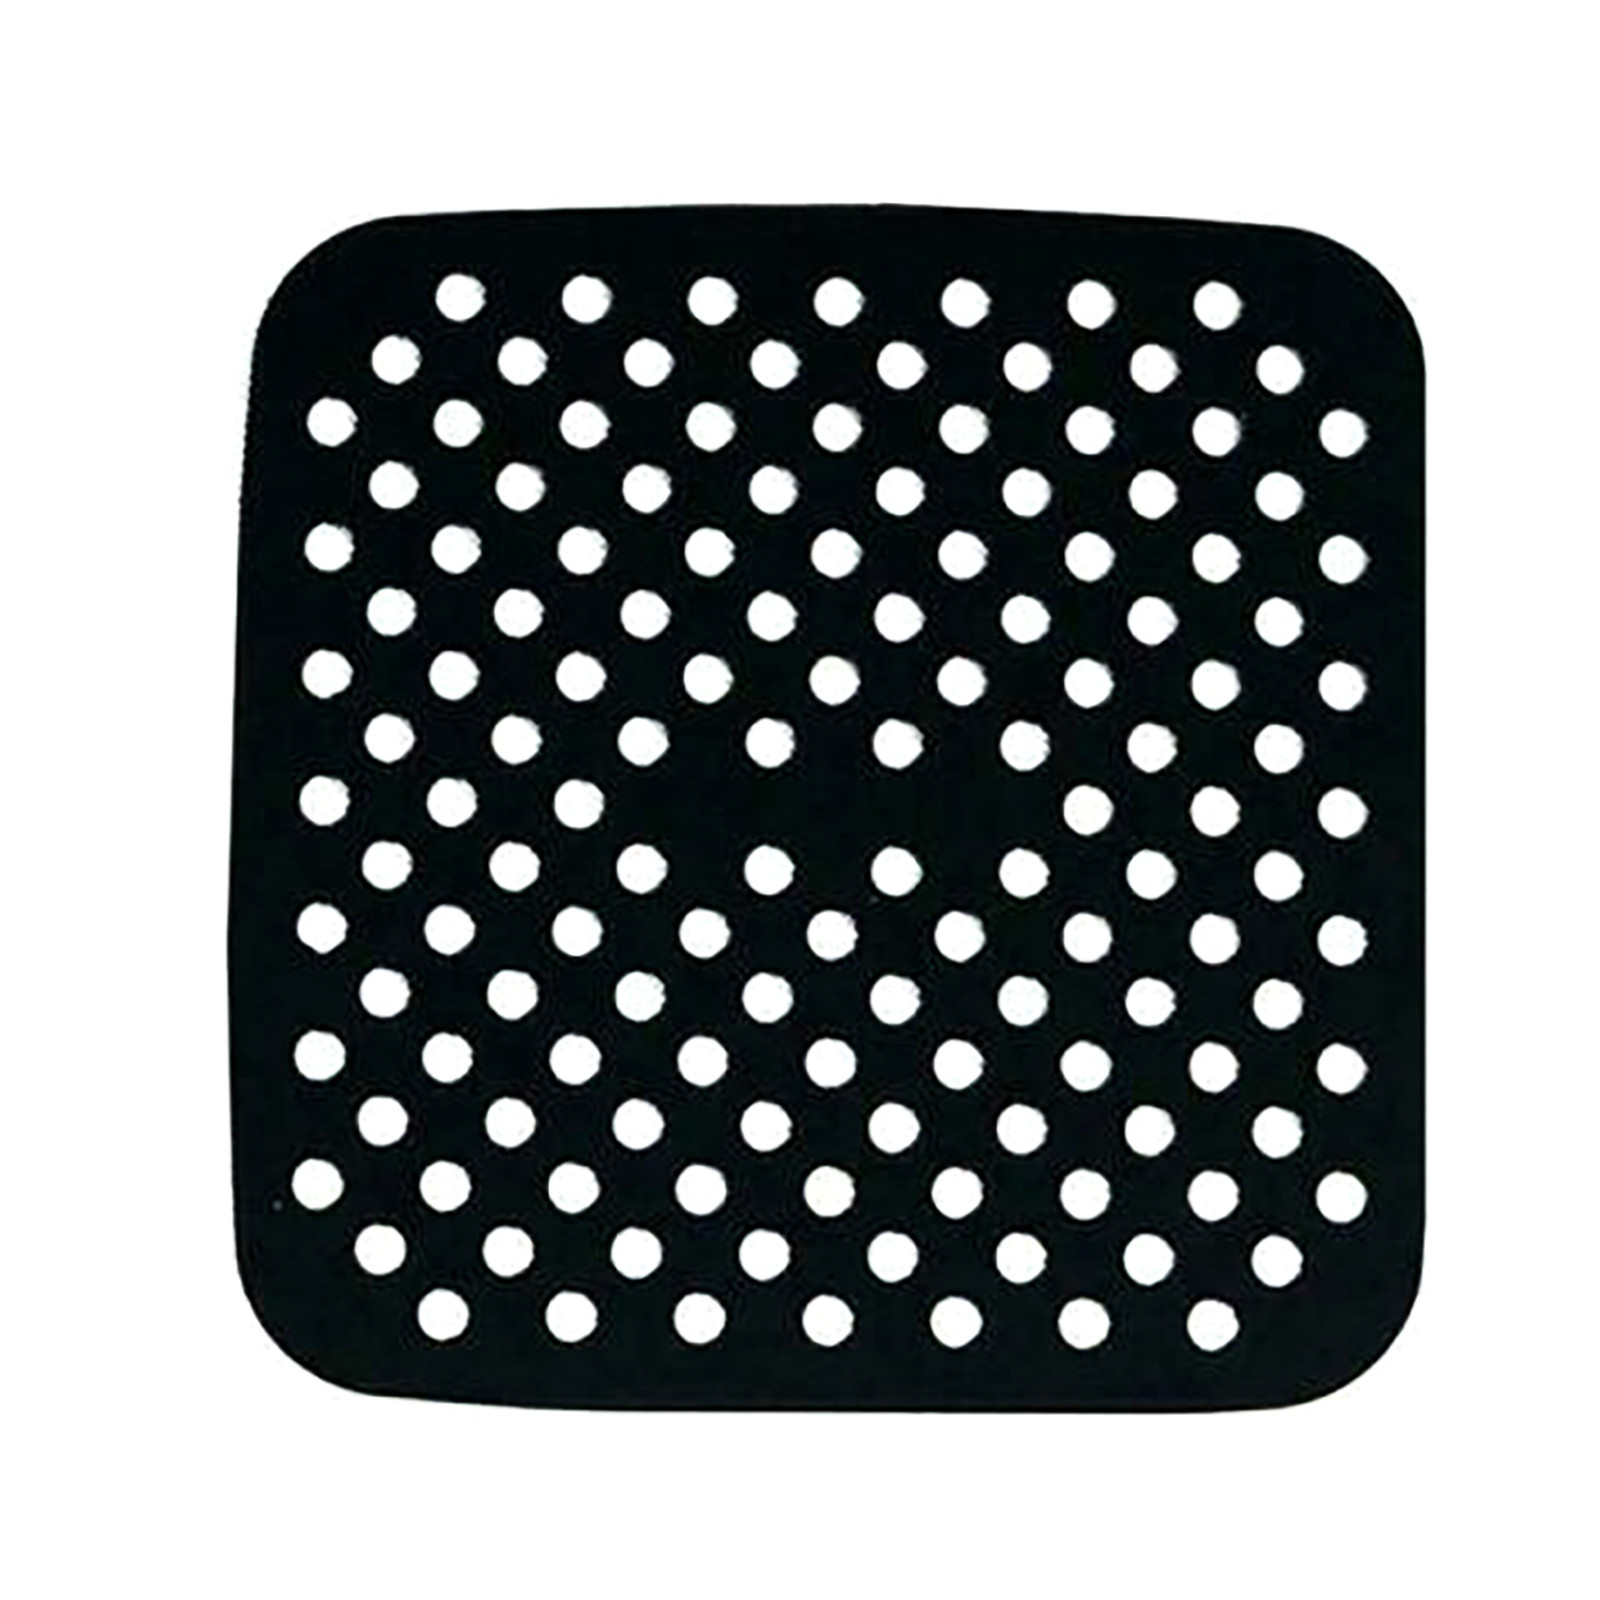 BPA-free Anti-slip Air Fryer Pads Round, 8 Inch Easy to Clean Silicone Air Fryer Basket Mats Non-Stick air fryer accessories for Baking & for Bamboo Steamers MNR 2 Pcs Reusable Air Fryer Liners 